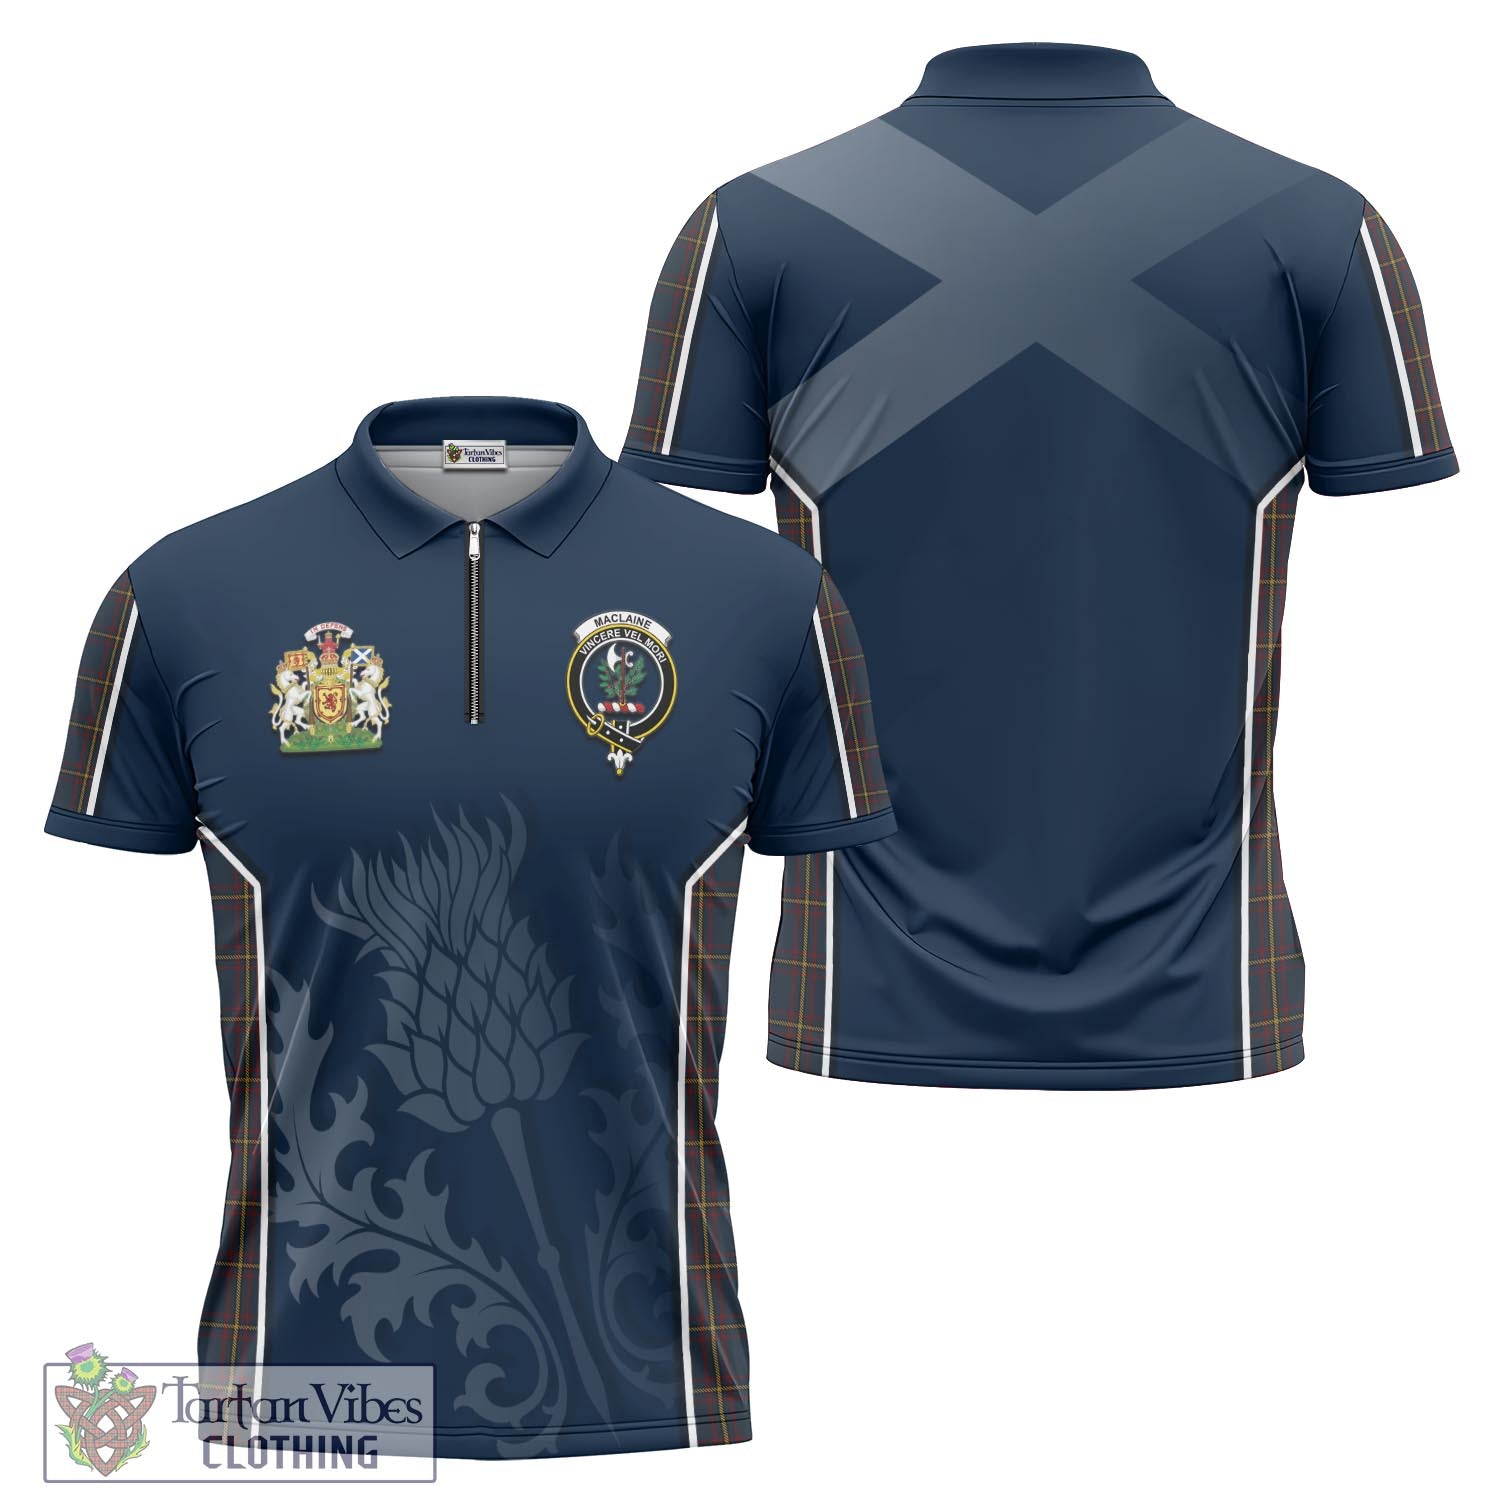 Tartan Vibes Clothing MacLaine of Lochbuie Hunting Tartan Zipper Polo Shirt with Family Crest and Scottish Thistle Vibes Sport Style